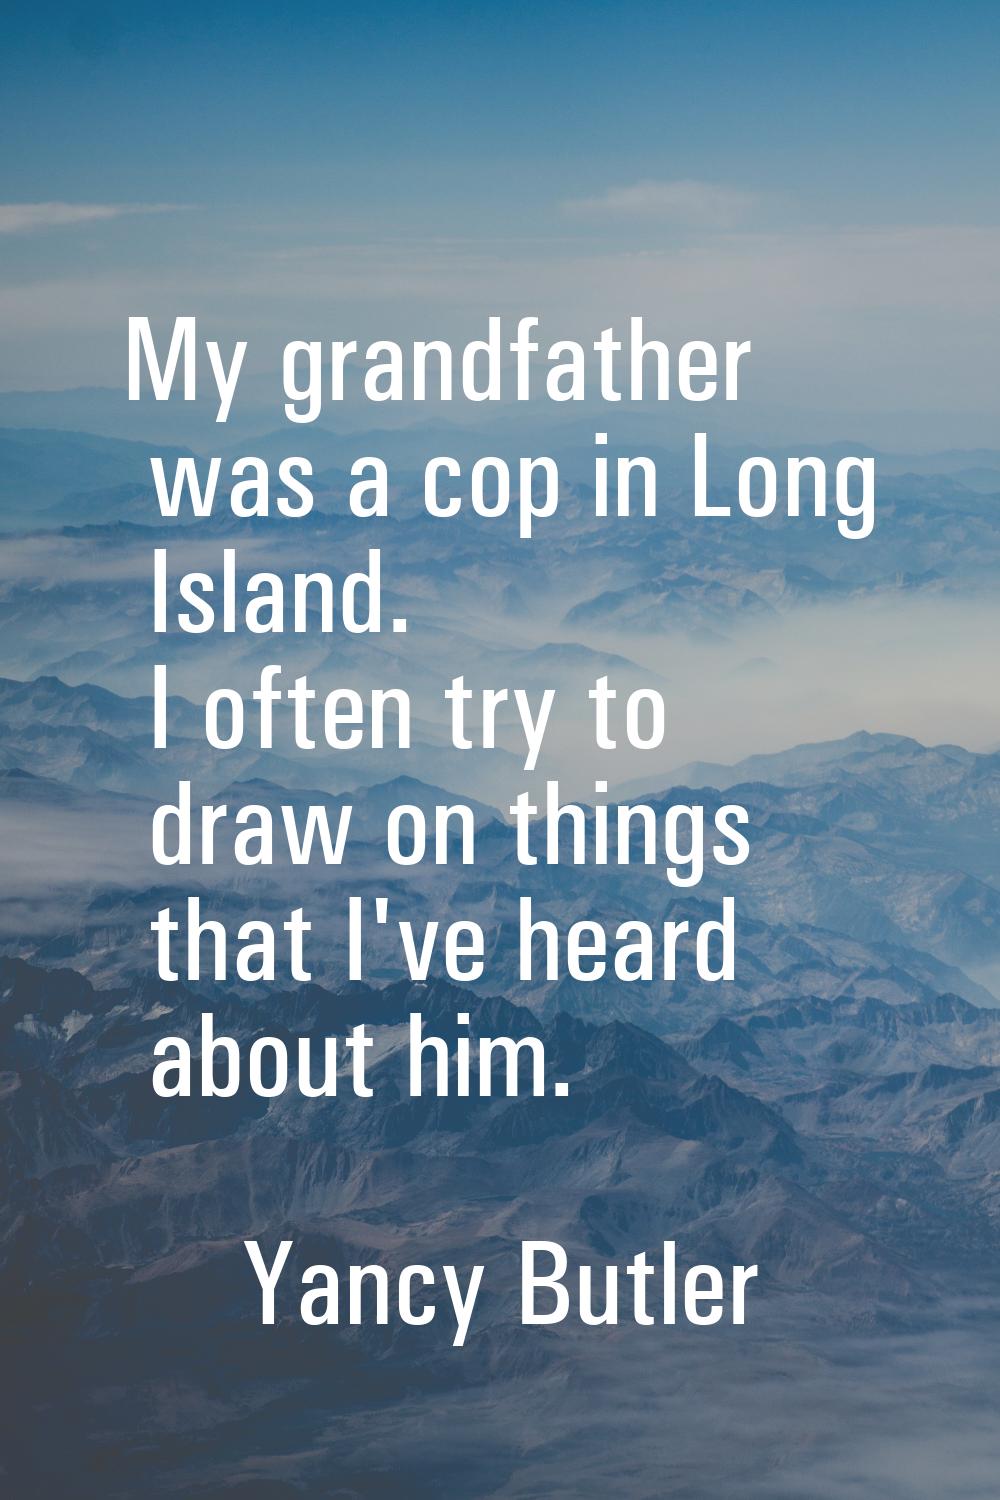 My grandfather was a cop in Long Island. I often try to draw on things that I've heard about him.